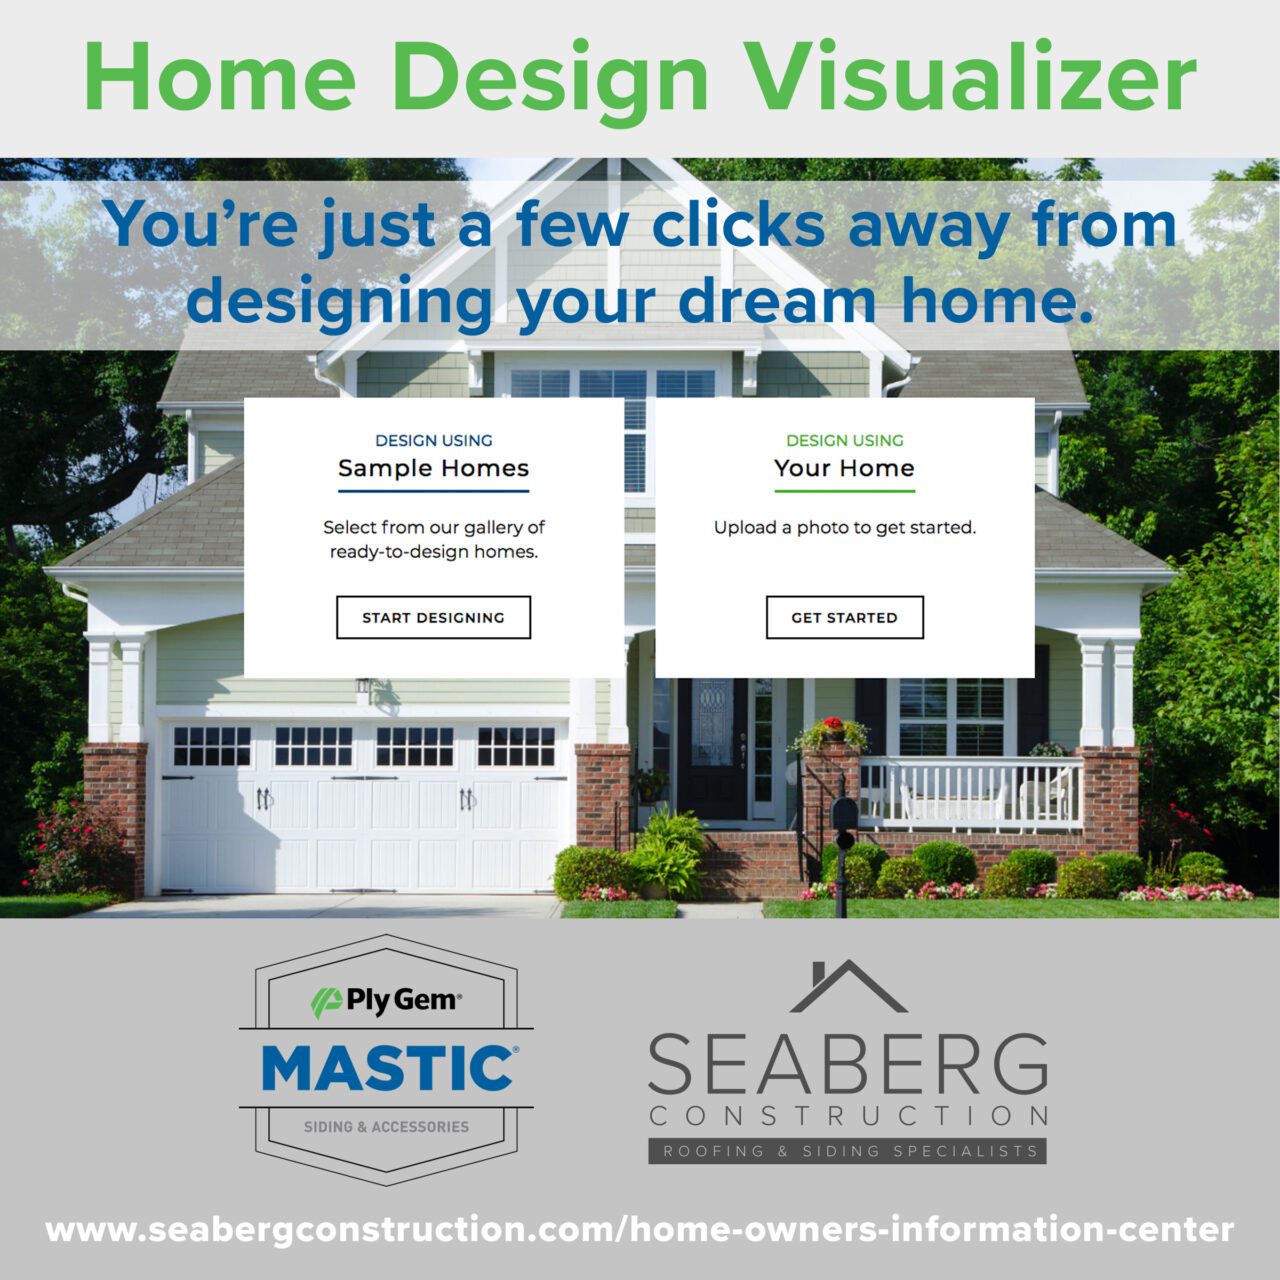 Seaberg Construction Blog Home Design Visualizer By Mastic